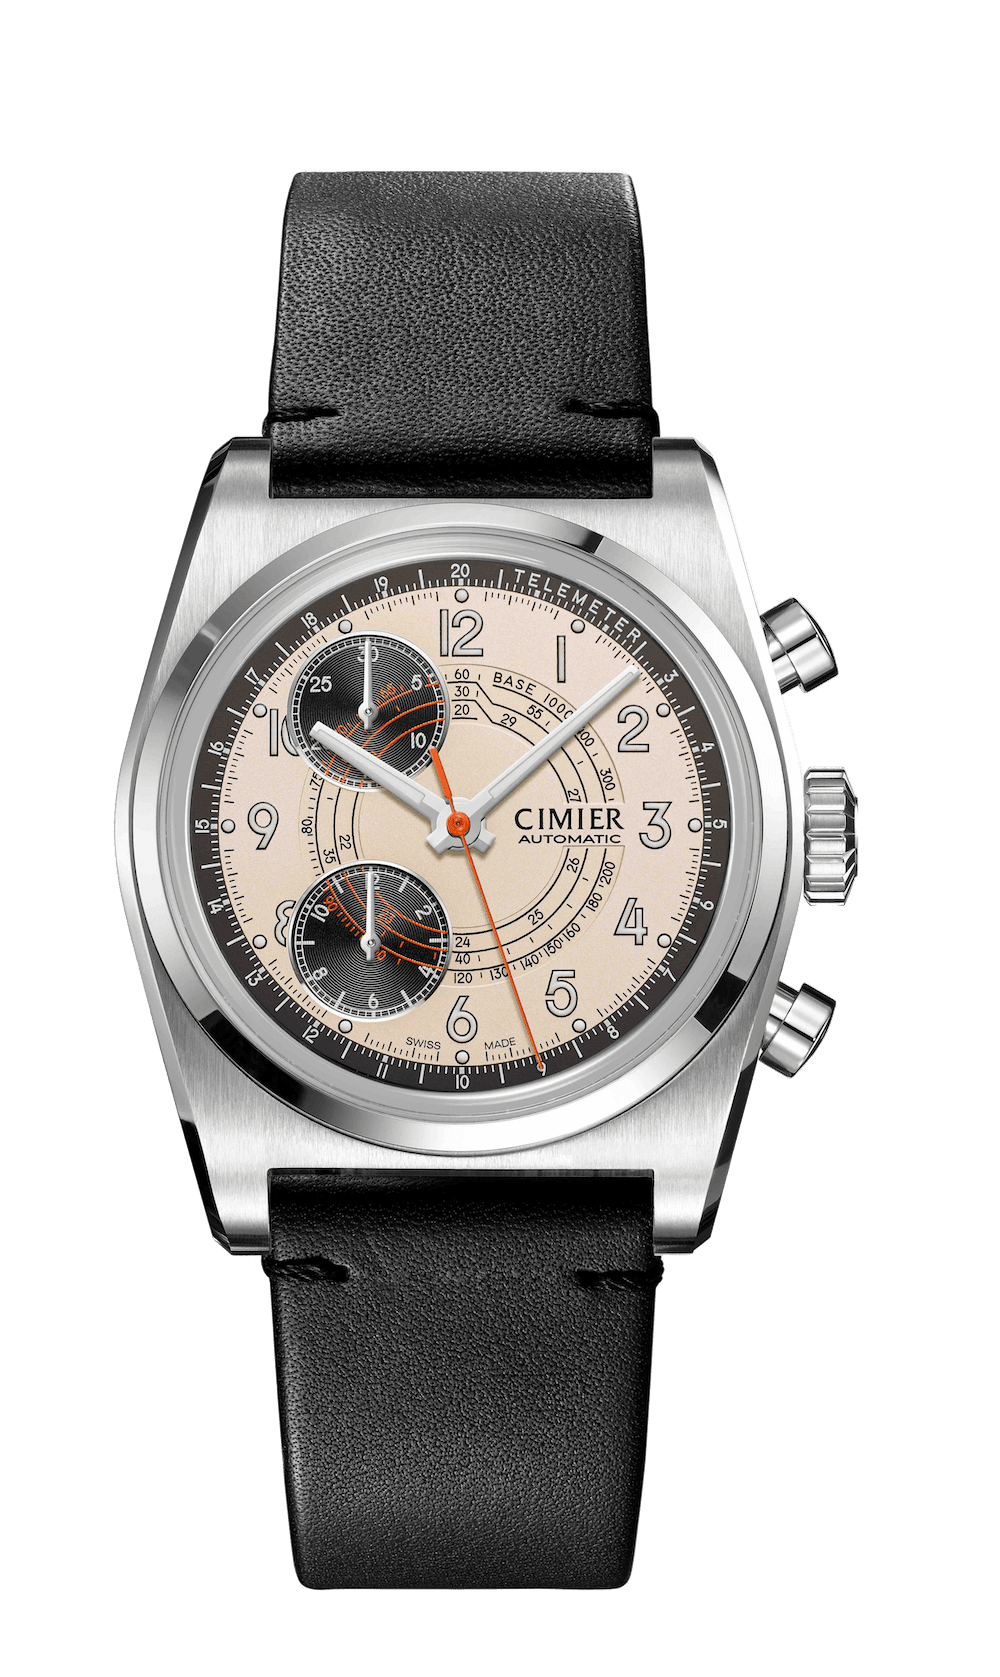 Cimier 711 Heritage Chronograph wristwatch with white dial and leather strap